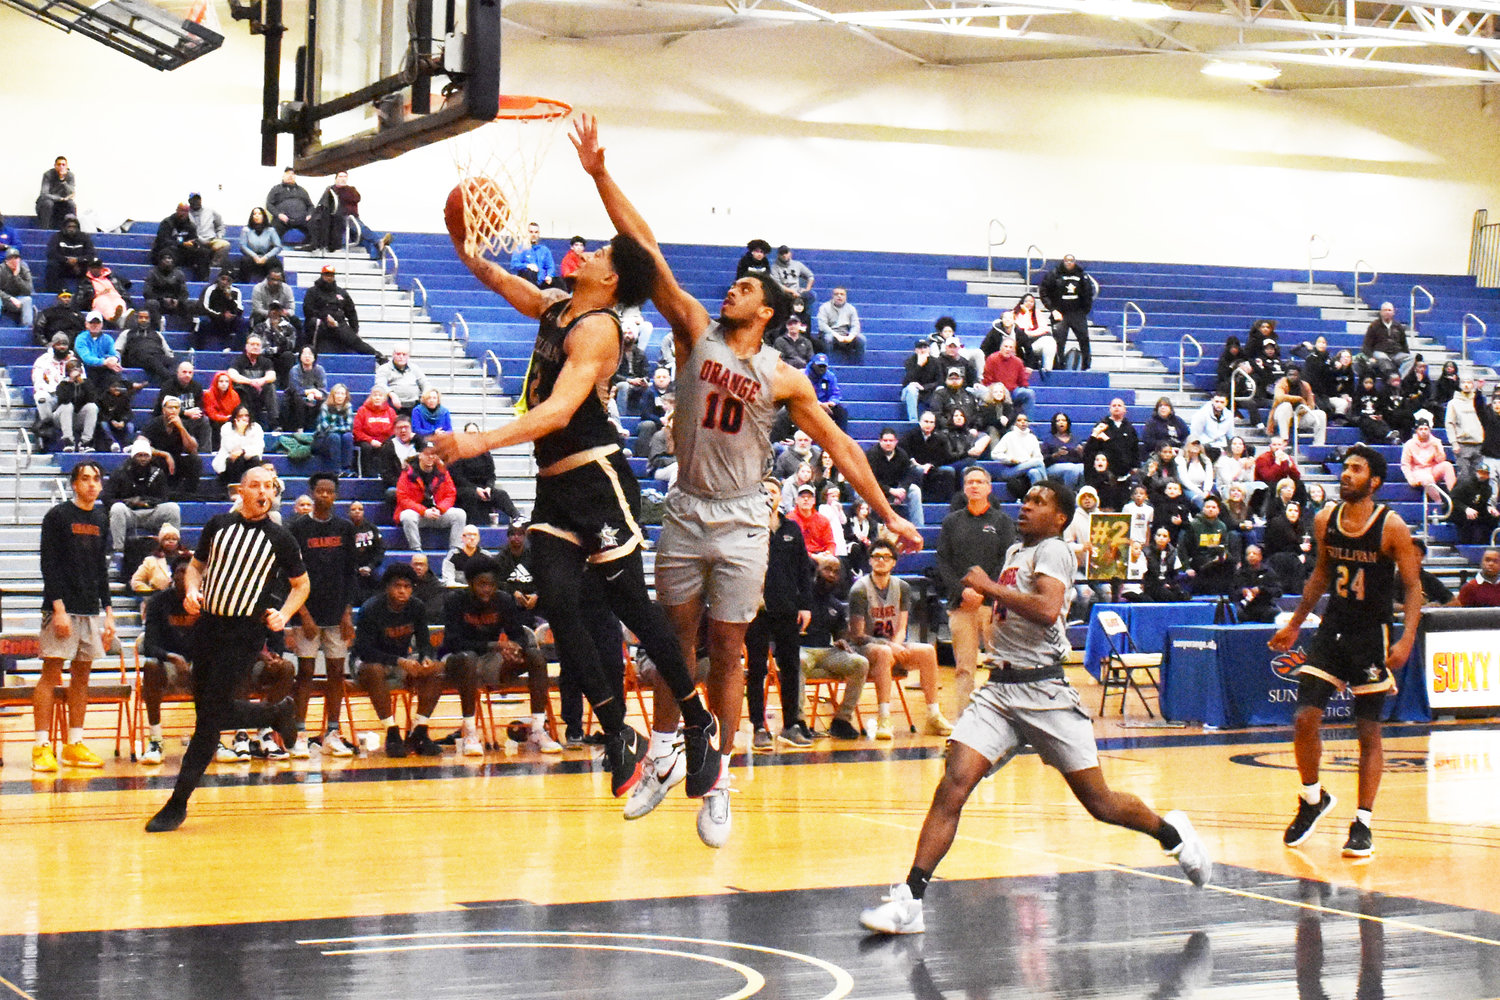 Jay Alvarez scored eight points in the fourth quarter as the Generals hung on to beat the undefeated Colts.